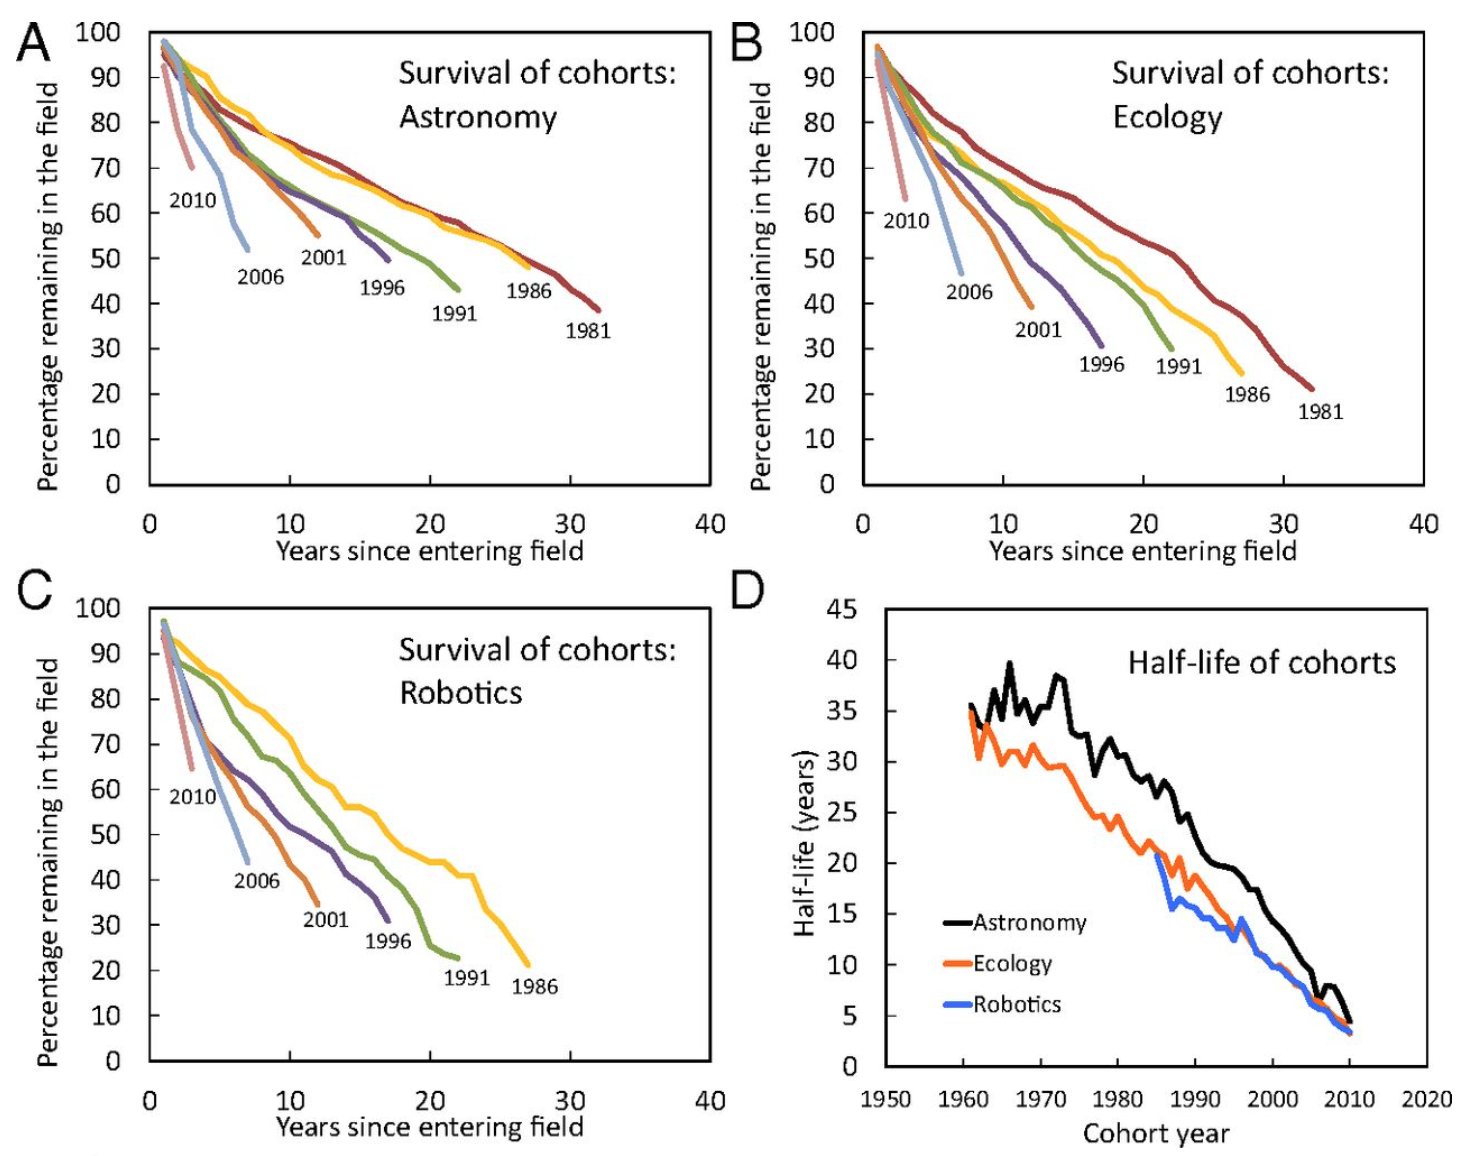 Survival functions of select cohorts in three fields (A–C) and the half-life (time needed for half of the cohort to abandon the field) of all cohorts from all three fields (D). The decline in survivability over the past half-century has been remarkable.